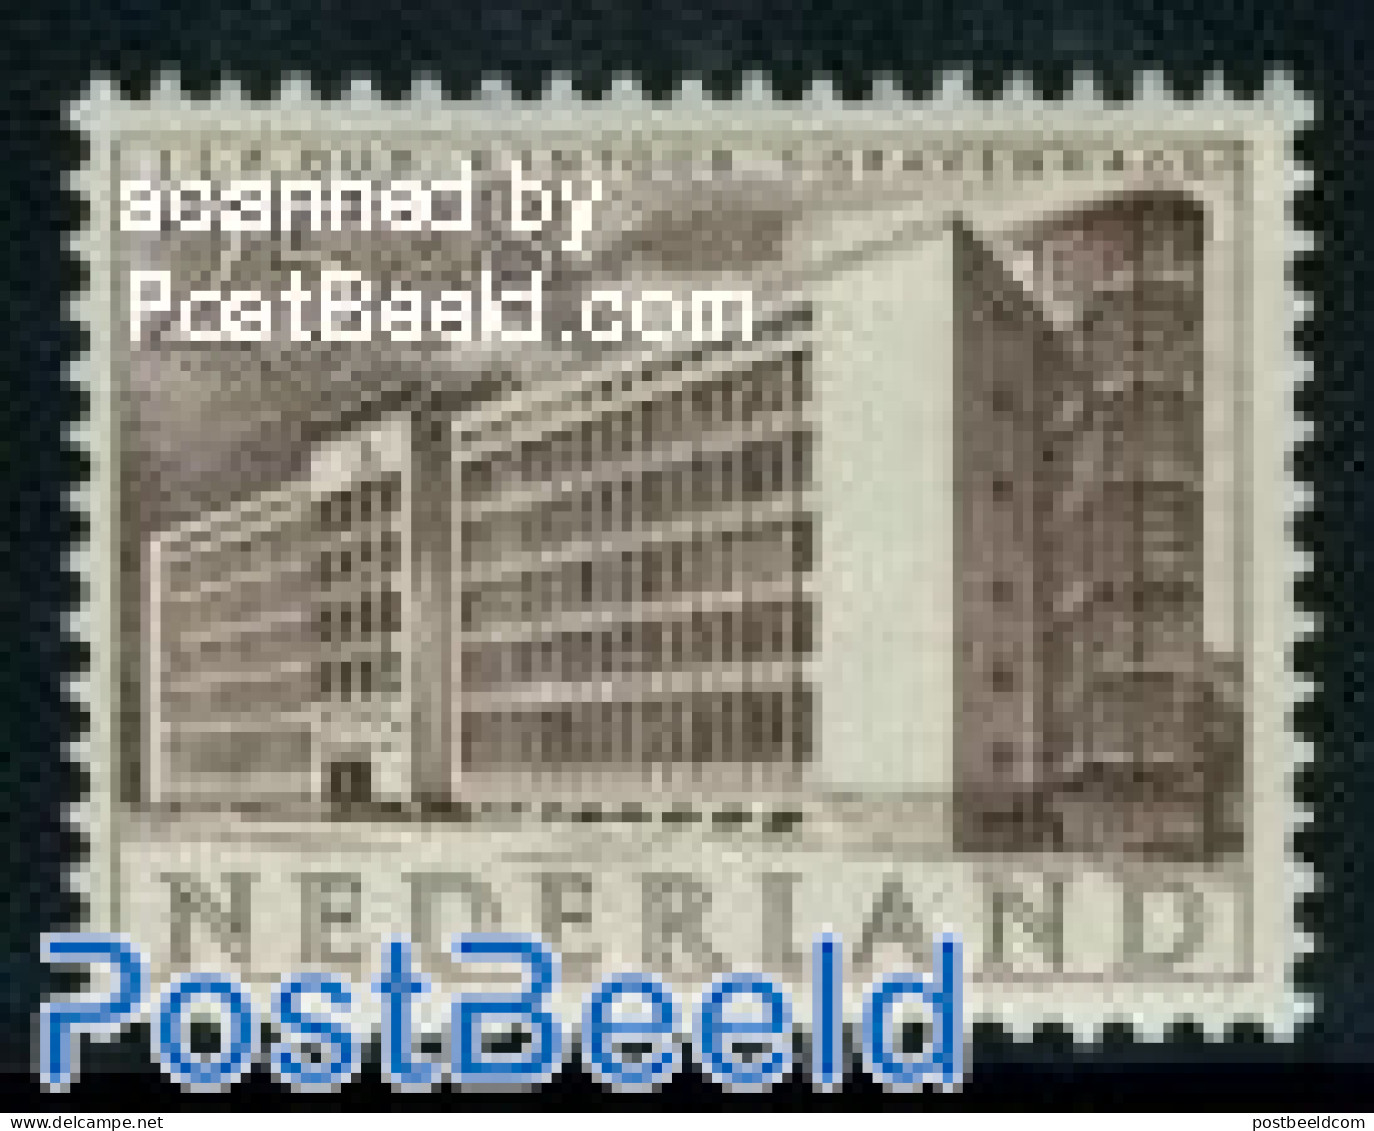 Netherlands 1955 25+8c, Den Haag, Stamp Out Of Set, Unused (hinged), Art - Modern Architecture - Nuovi